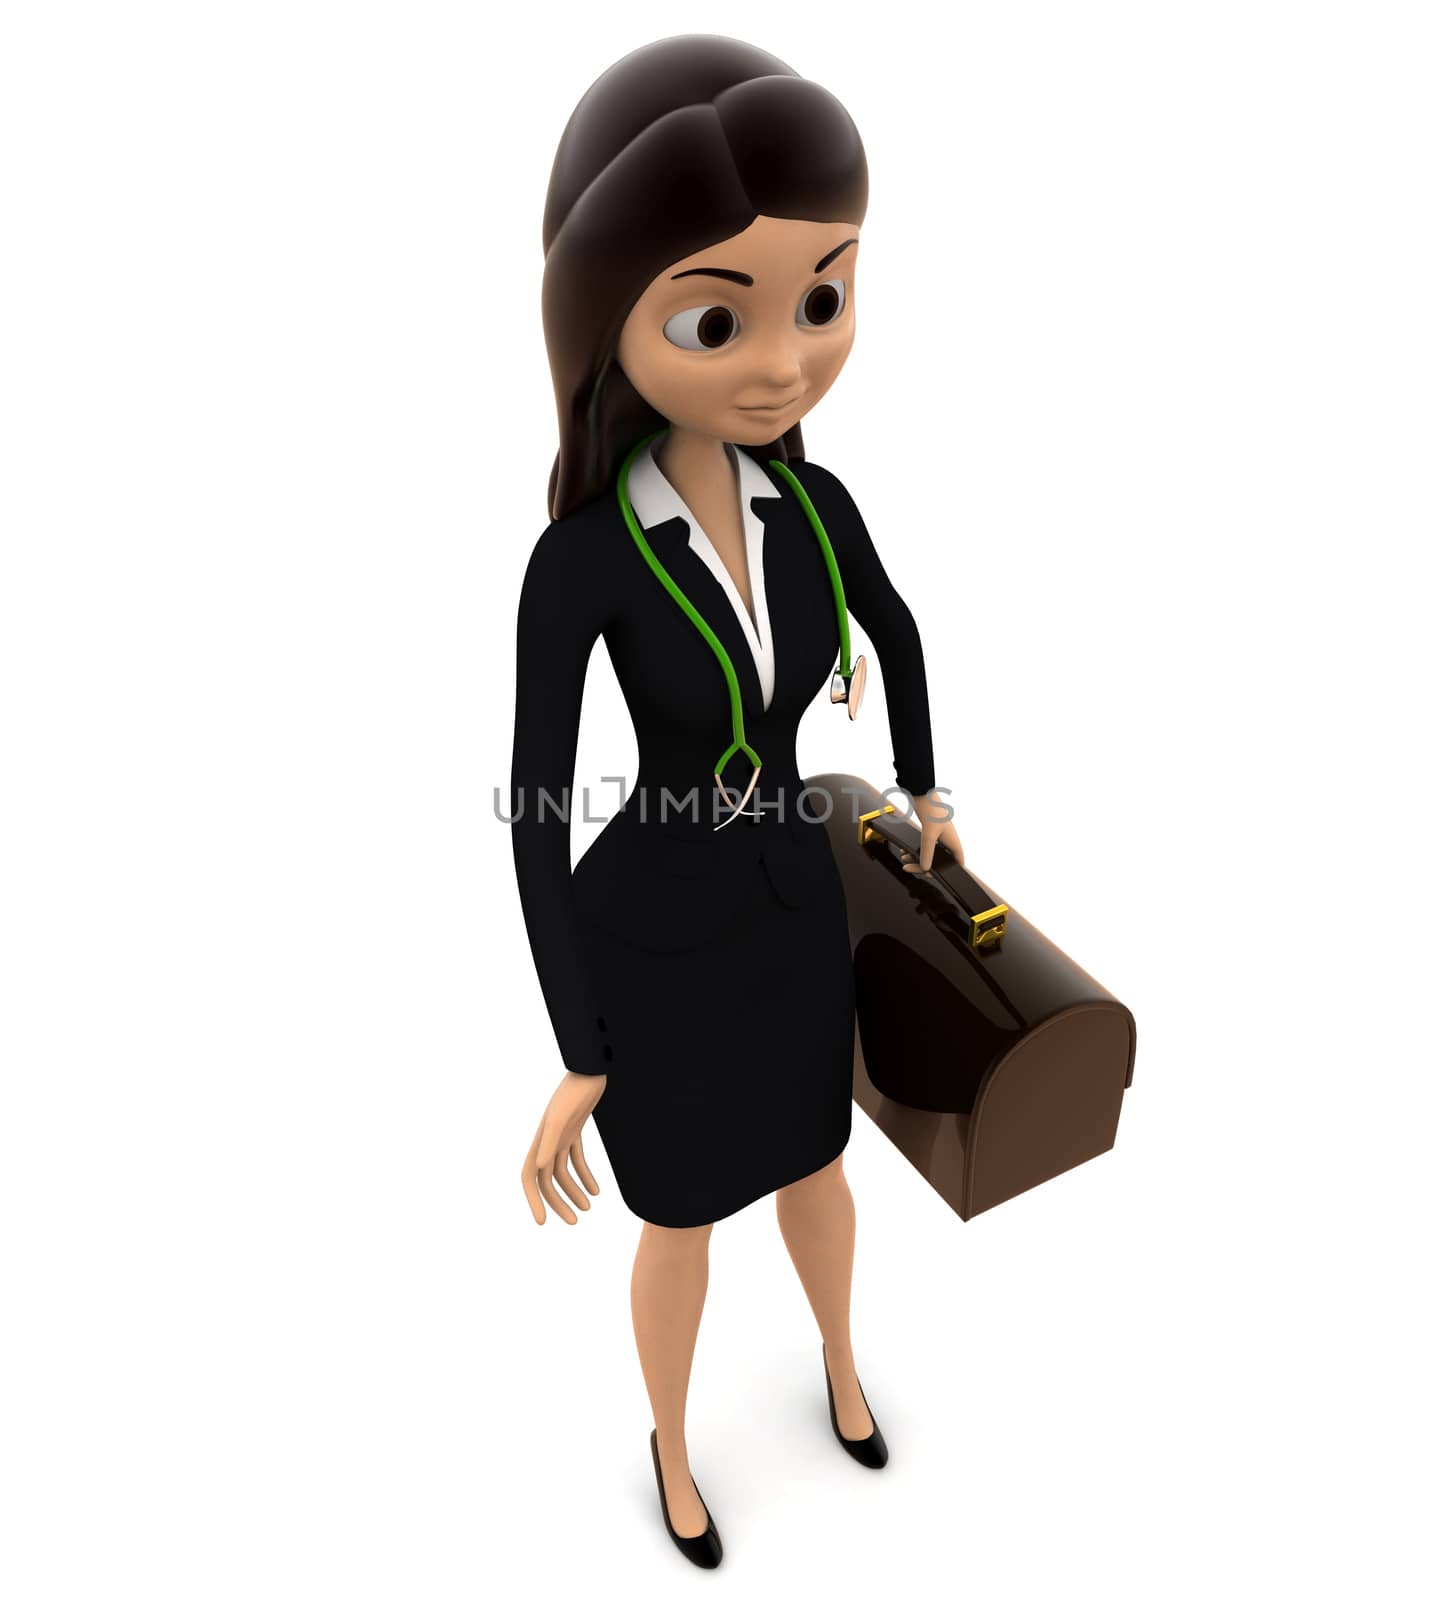 3d woman stanidng with brown bag and strethoscope on neck concept by touchmenithin@gmail.com